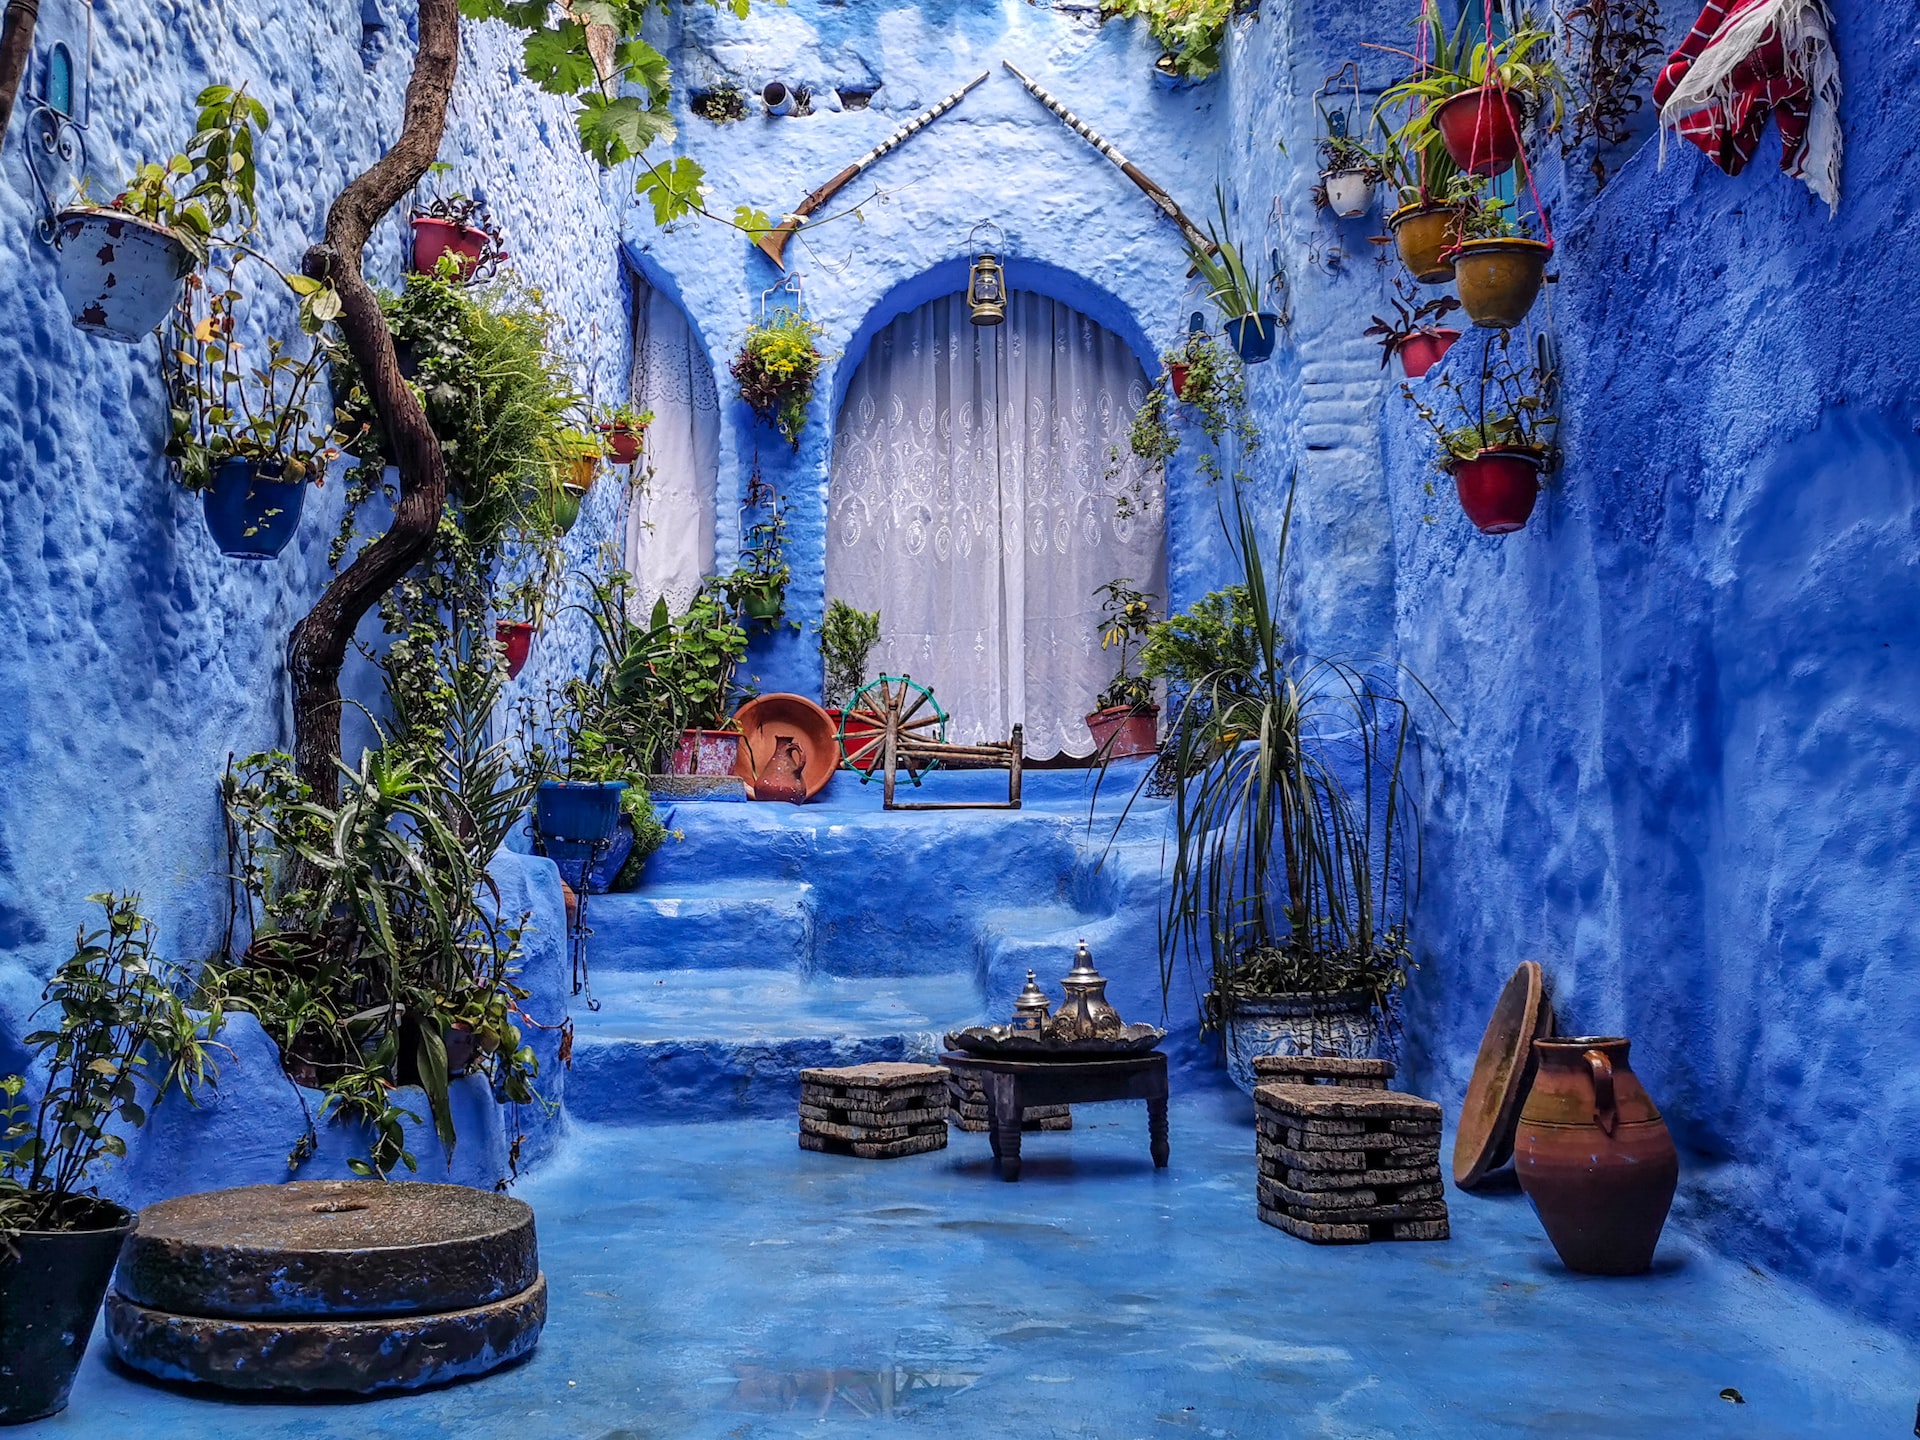 Chefcaouen blue city things to do in morocco
